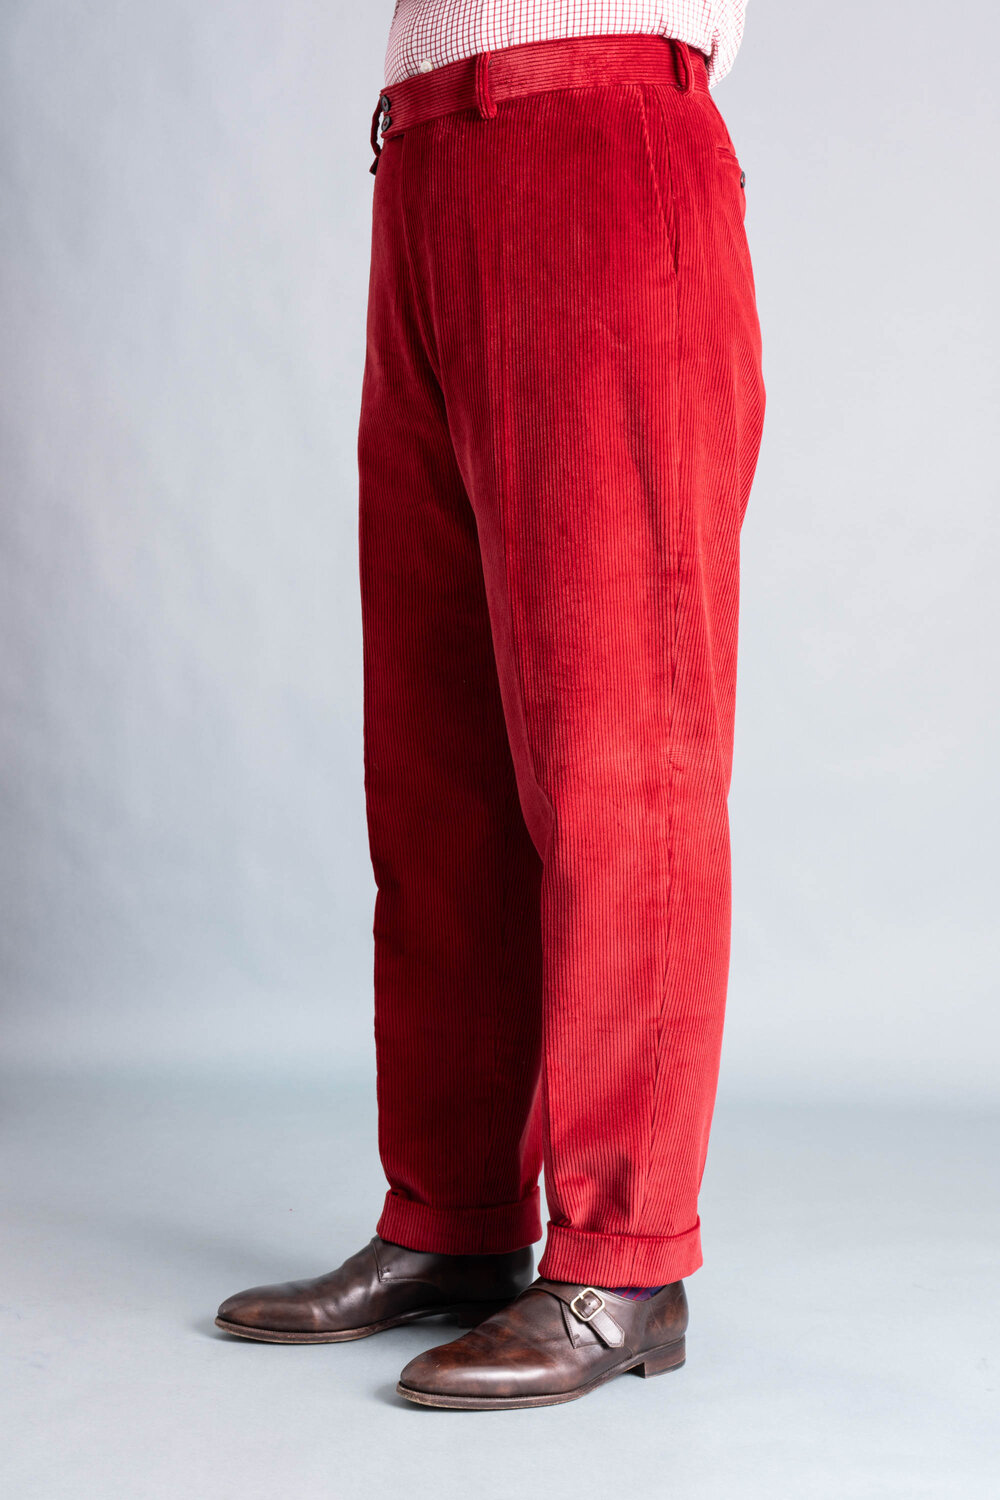 Left side angle front view of the Garnet red corduroy trousers-_R5_8607